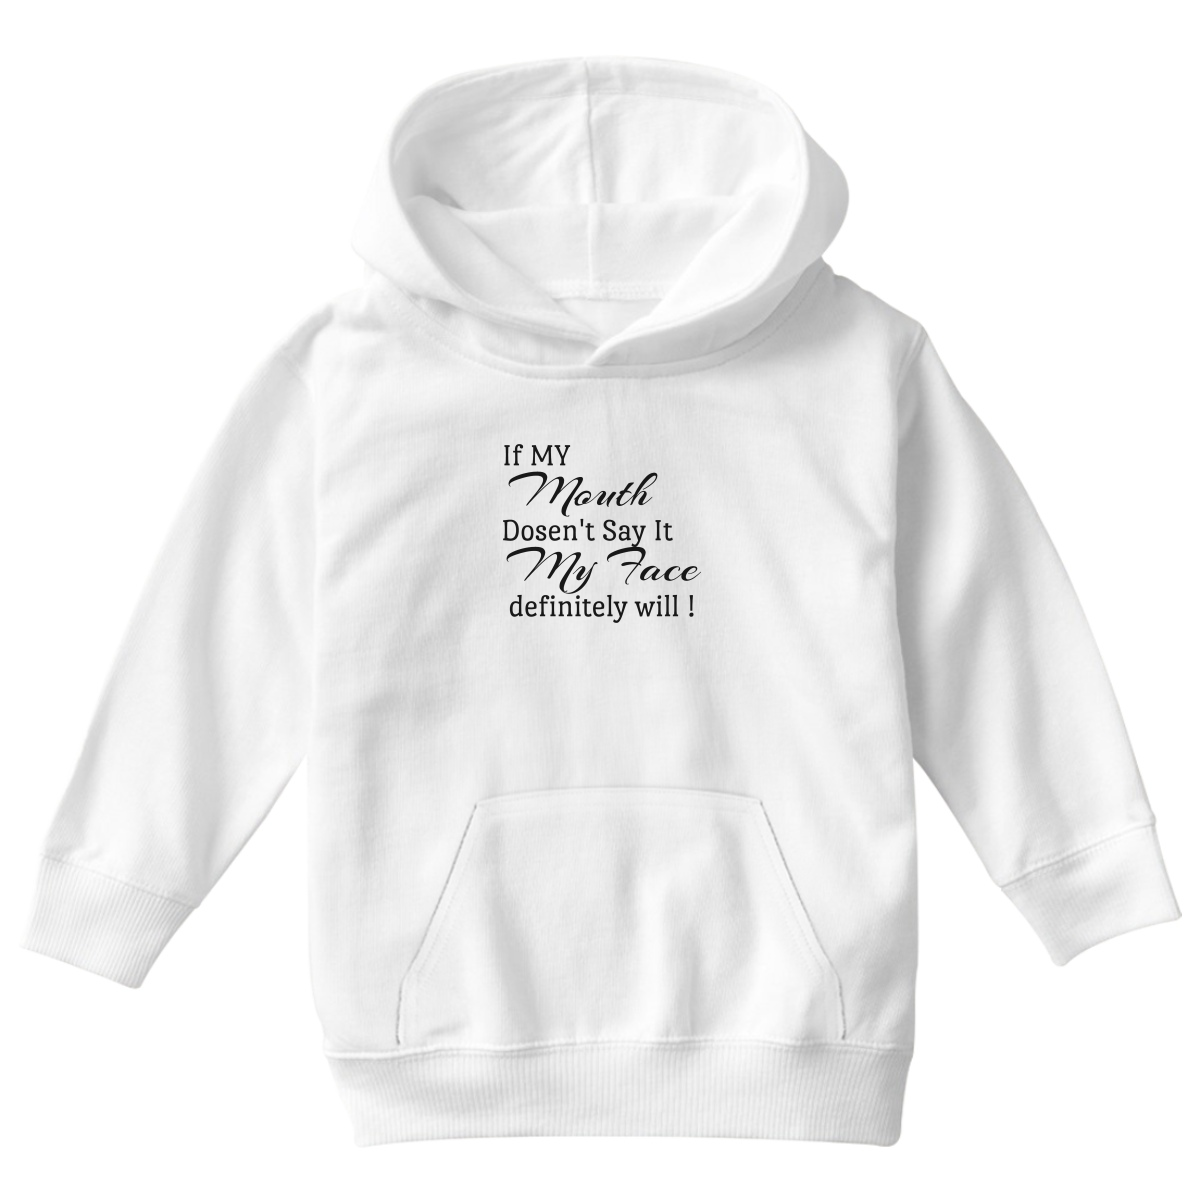 If My Mouth Doesn't Say It My Face Definitely Will  Kids Hoodie | White